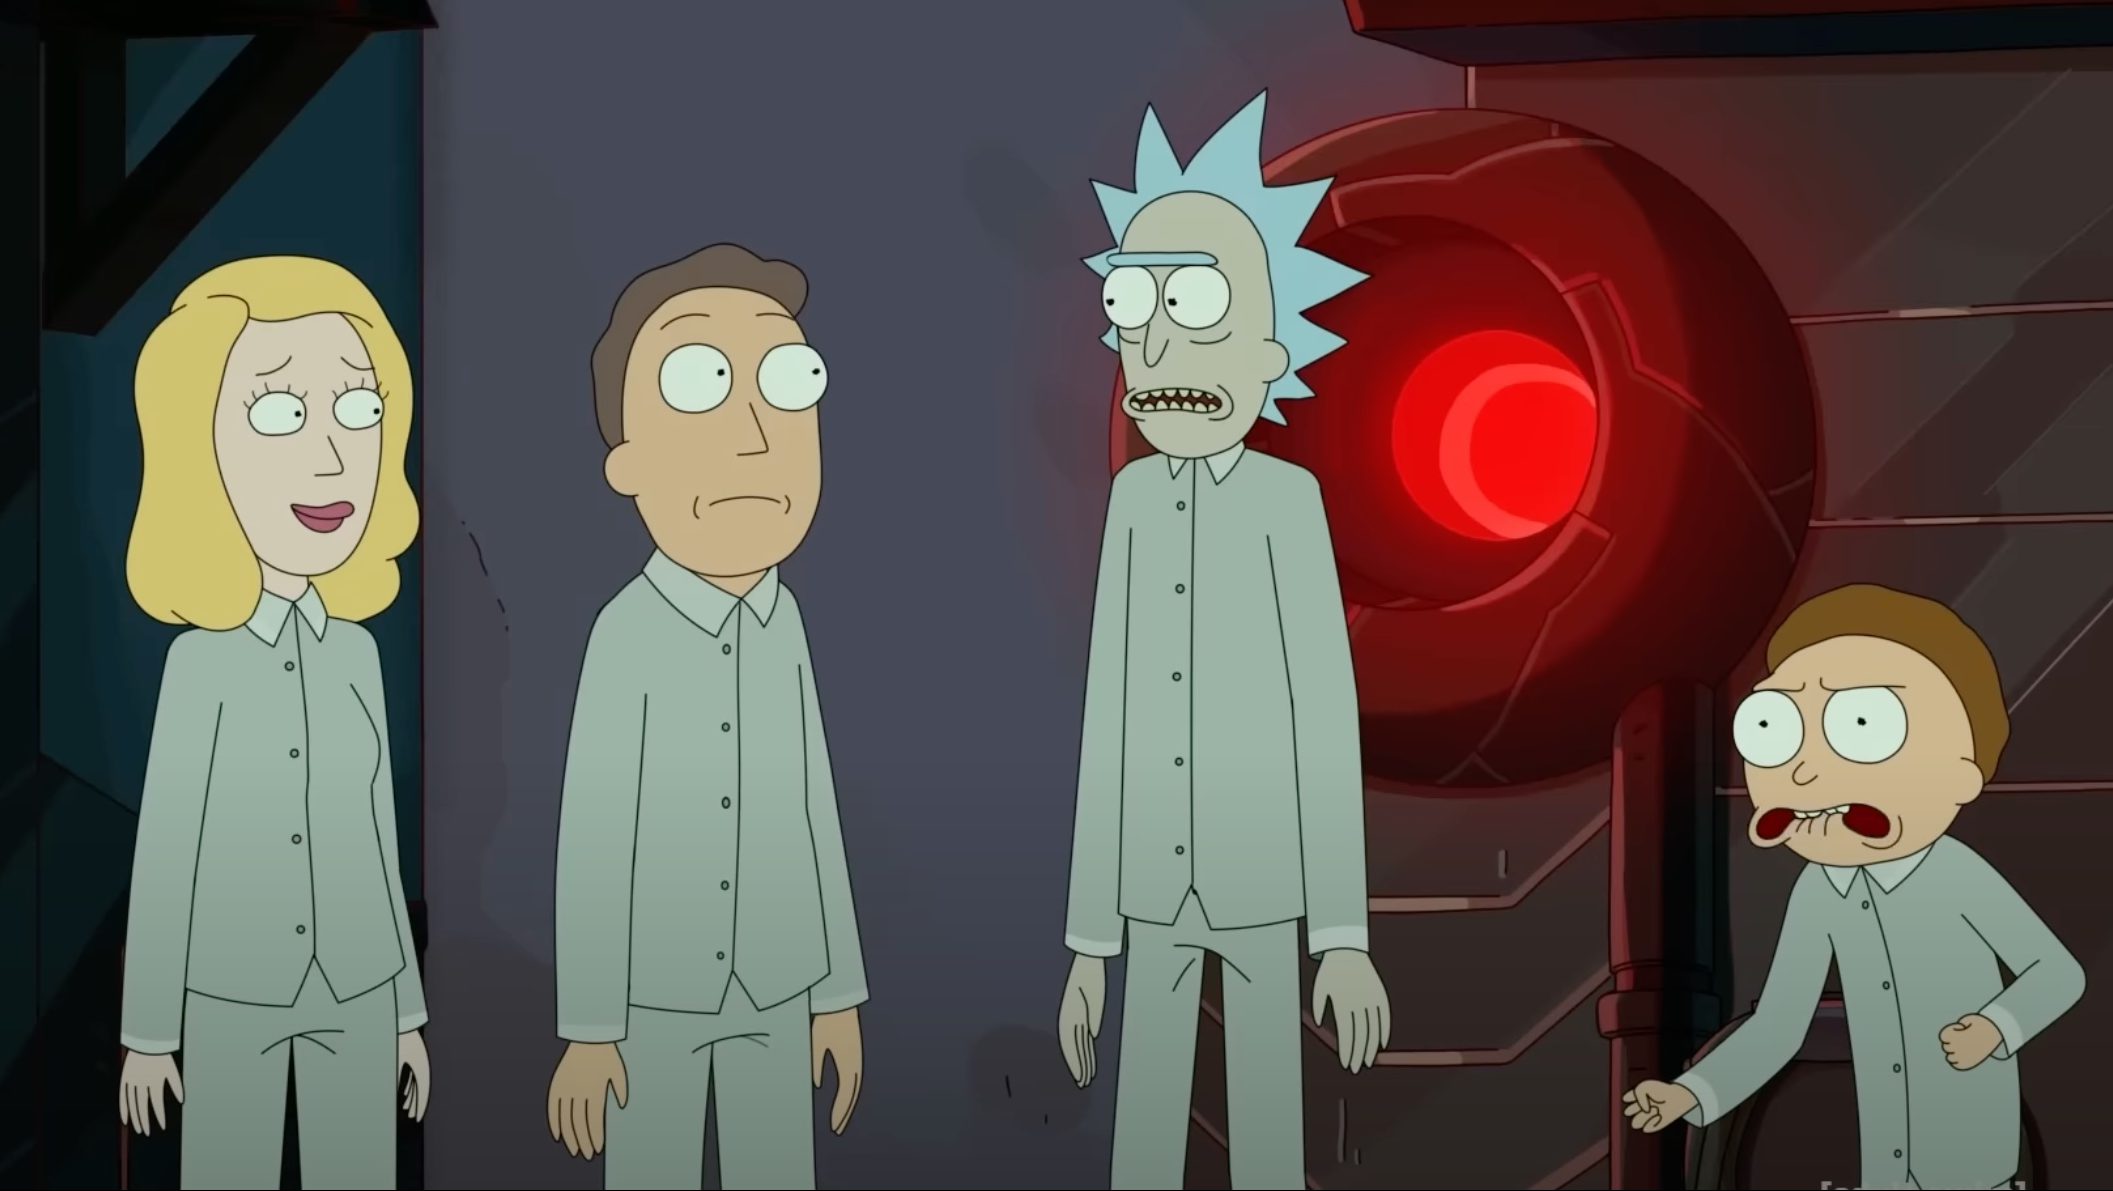 Is 'Rick and Morty' Season 6 on AdultSwim.com or the App?